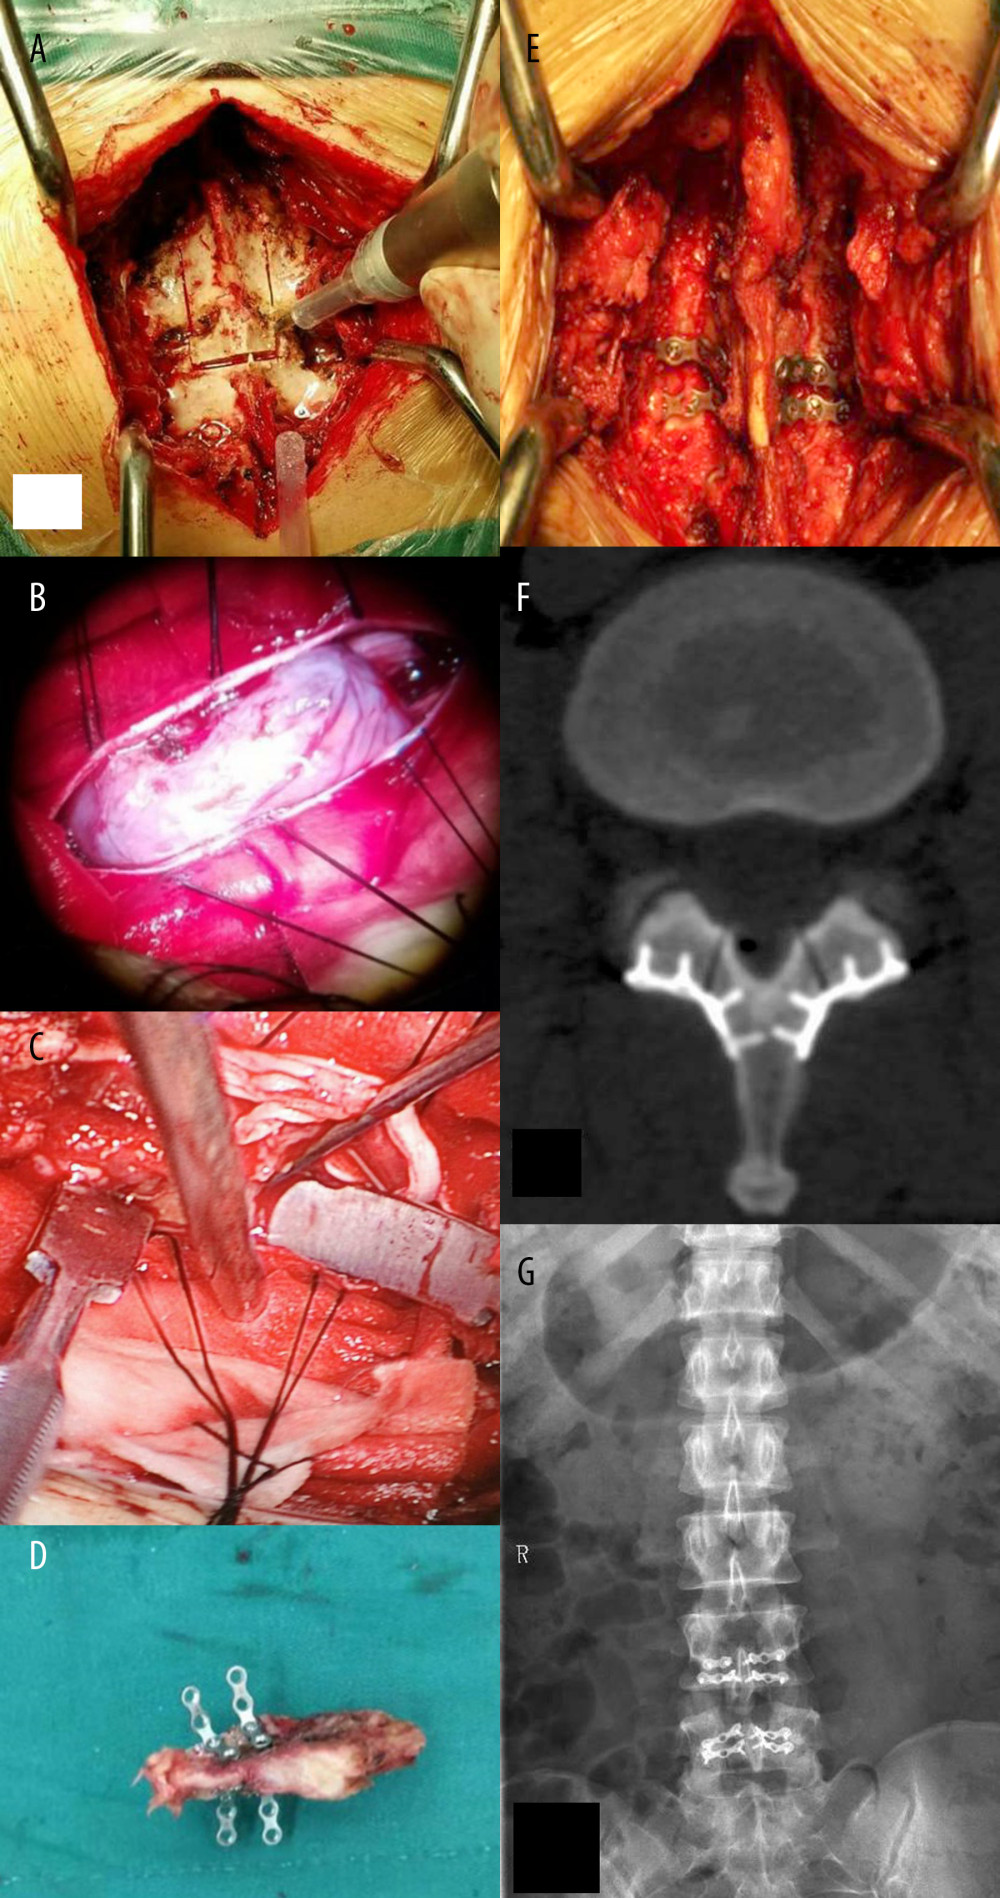 (A) Laminectomy under ultrasonic osteotome; (B) the tumor tissue under a microscope; (C) intraoperative image of the microscope screen; (D) the free lamina with a titanium plate; (E) replantation of lamina and spinous process in the original location; (F, G) postoperative images of the patient.